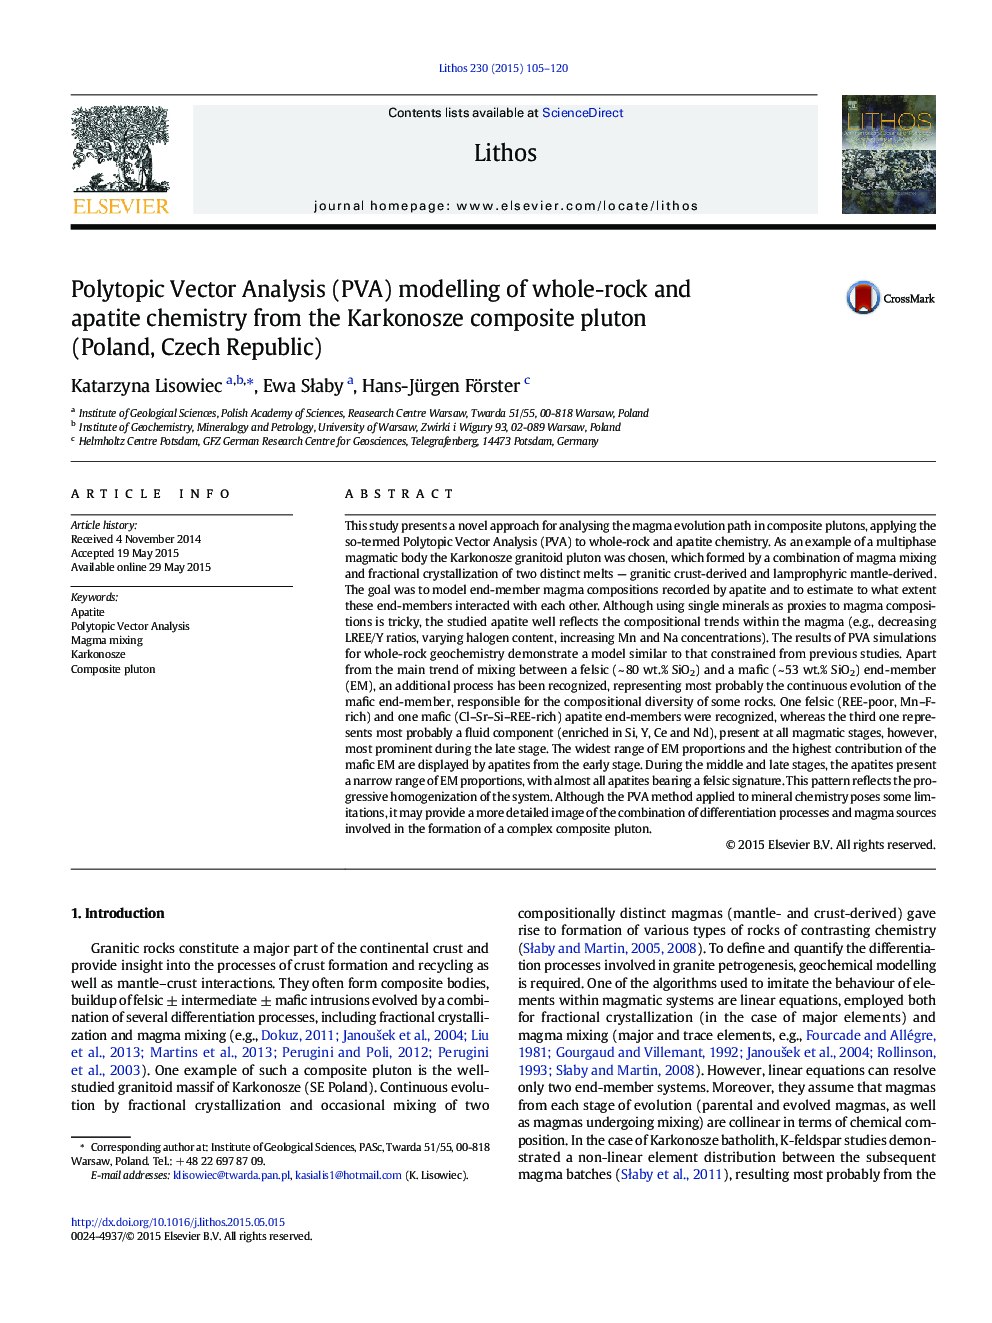 Polytopic Vector Analysis (PVA) modelling of whole-rock and apatite chemistry from the Karkonosze composite pluton (Poland, Czech Republic)